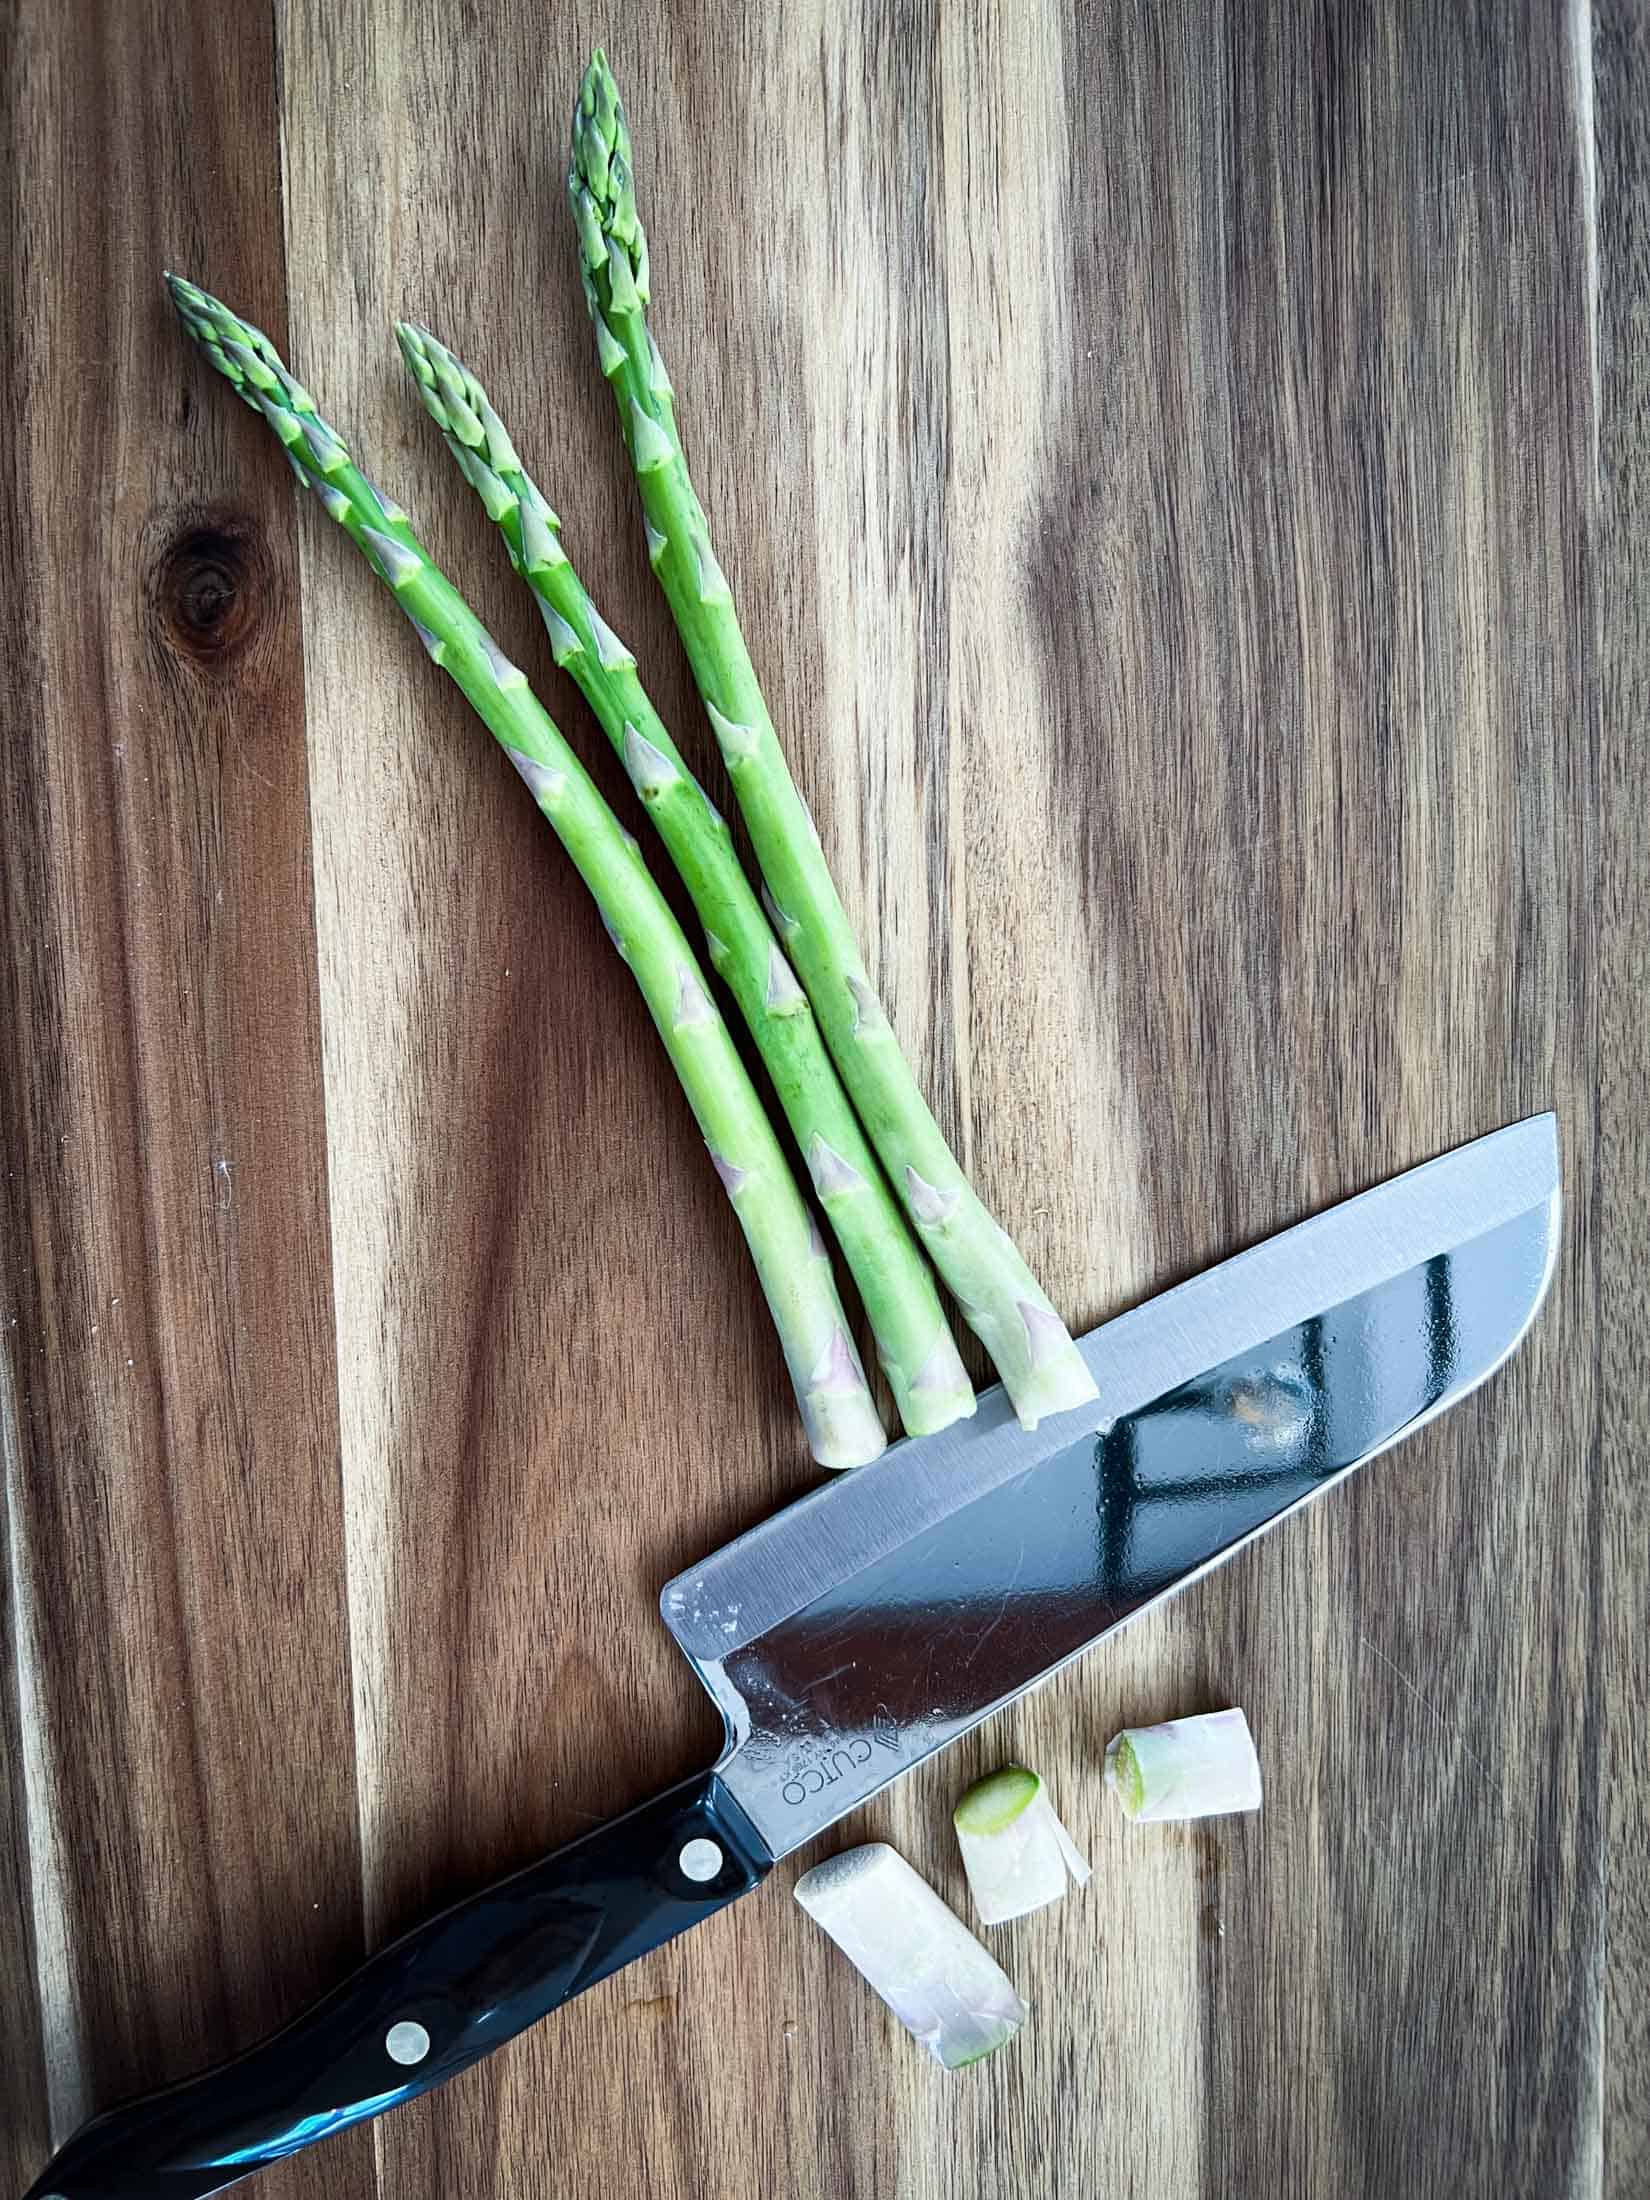 White ends being cut off of asparagus spears.